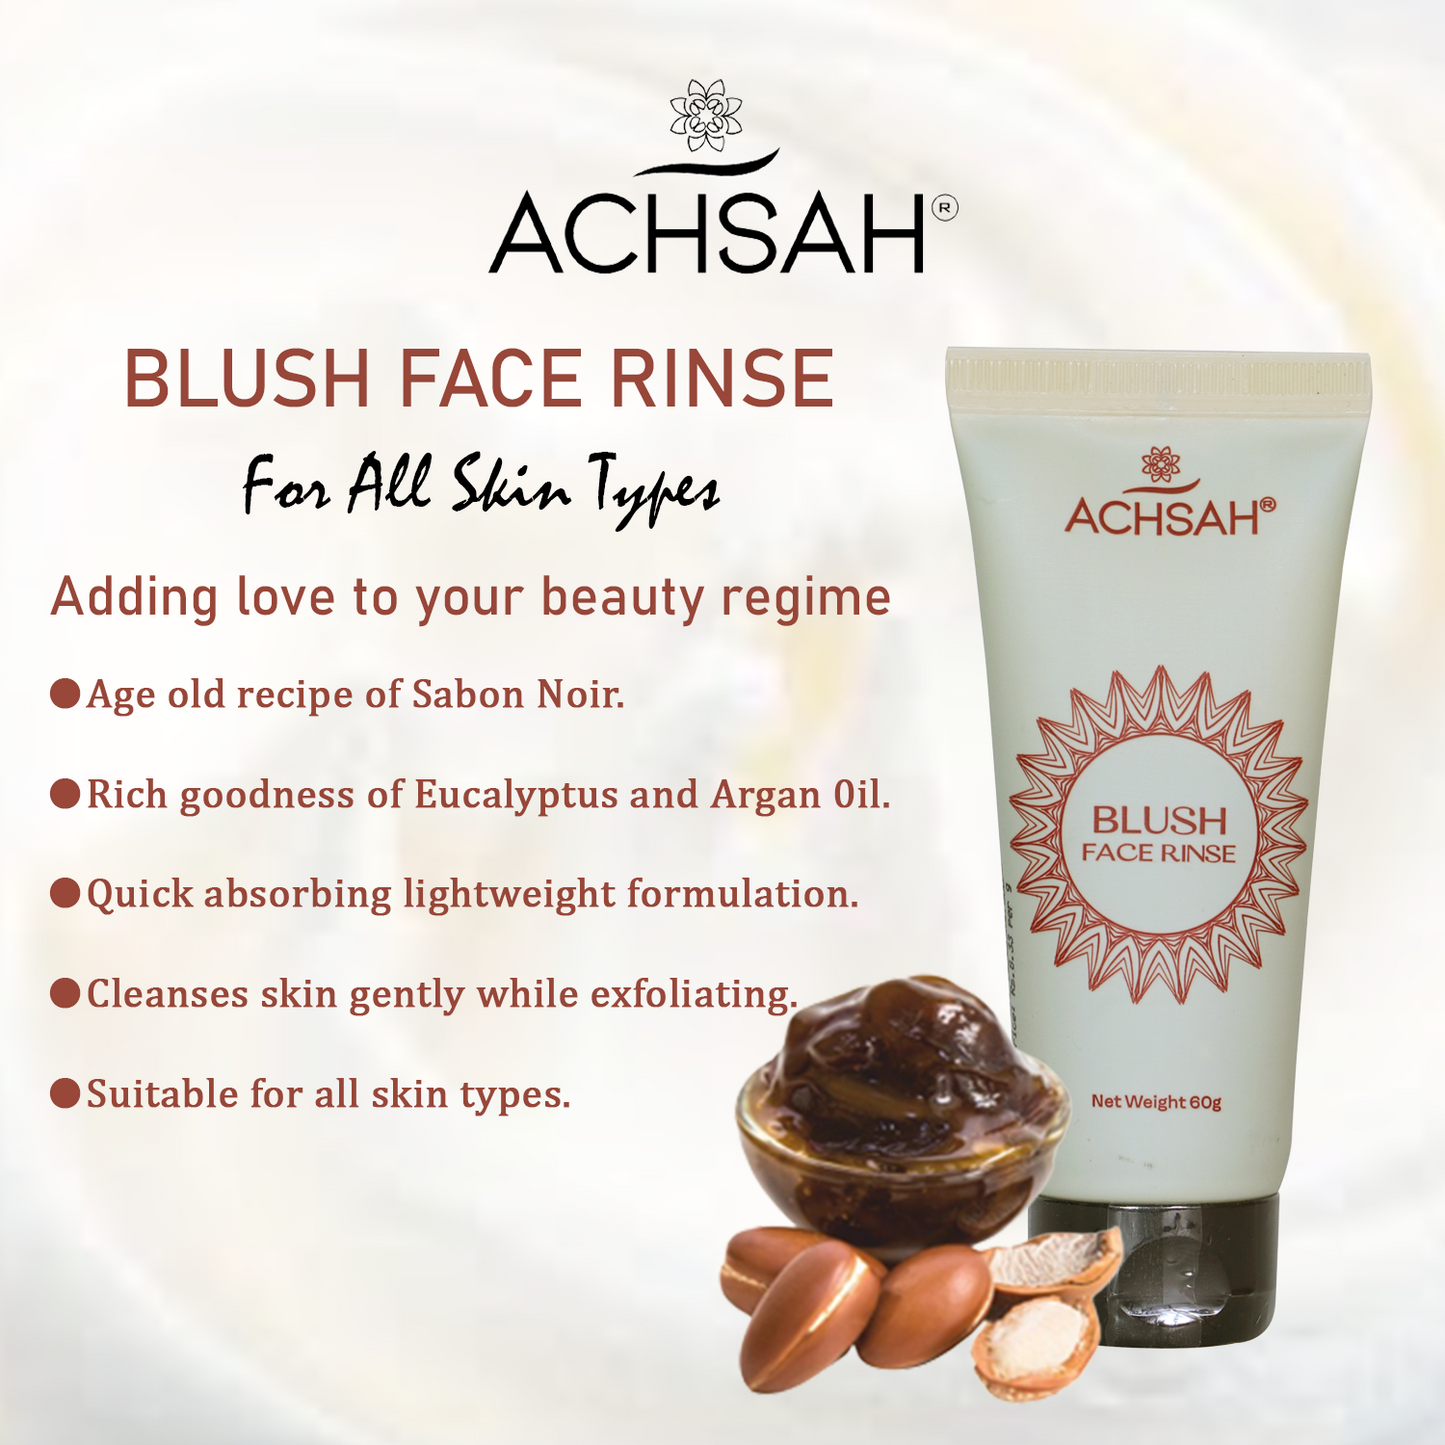 ACHSAH Blush Face Rinse (Face Wash) With Travel Pack